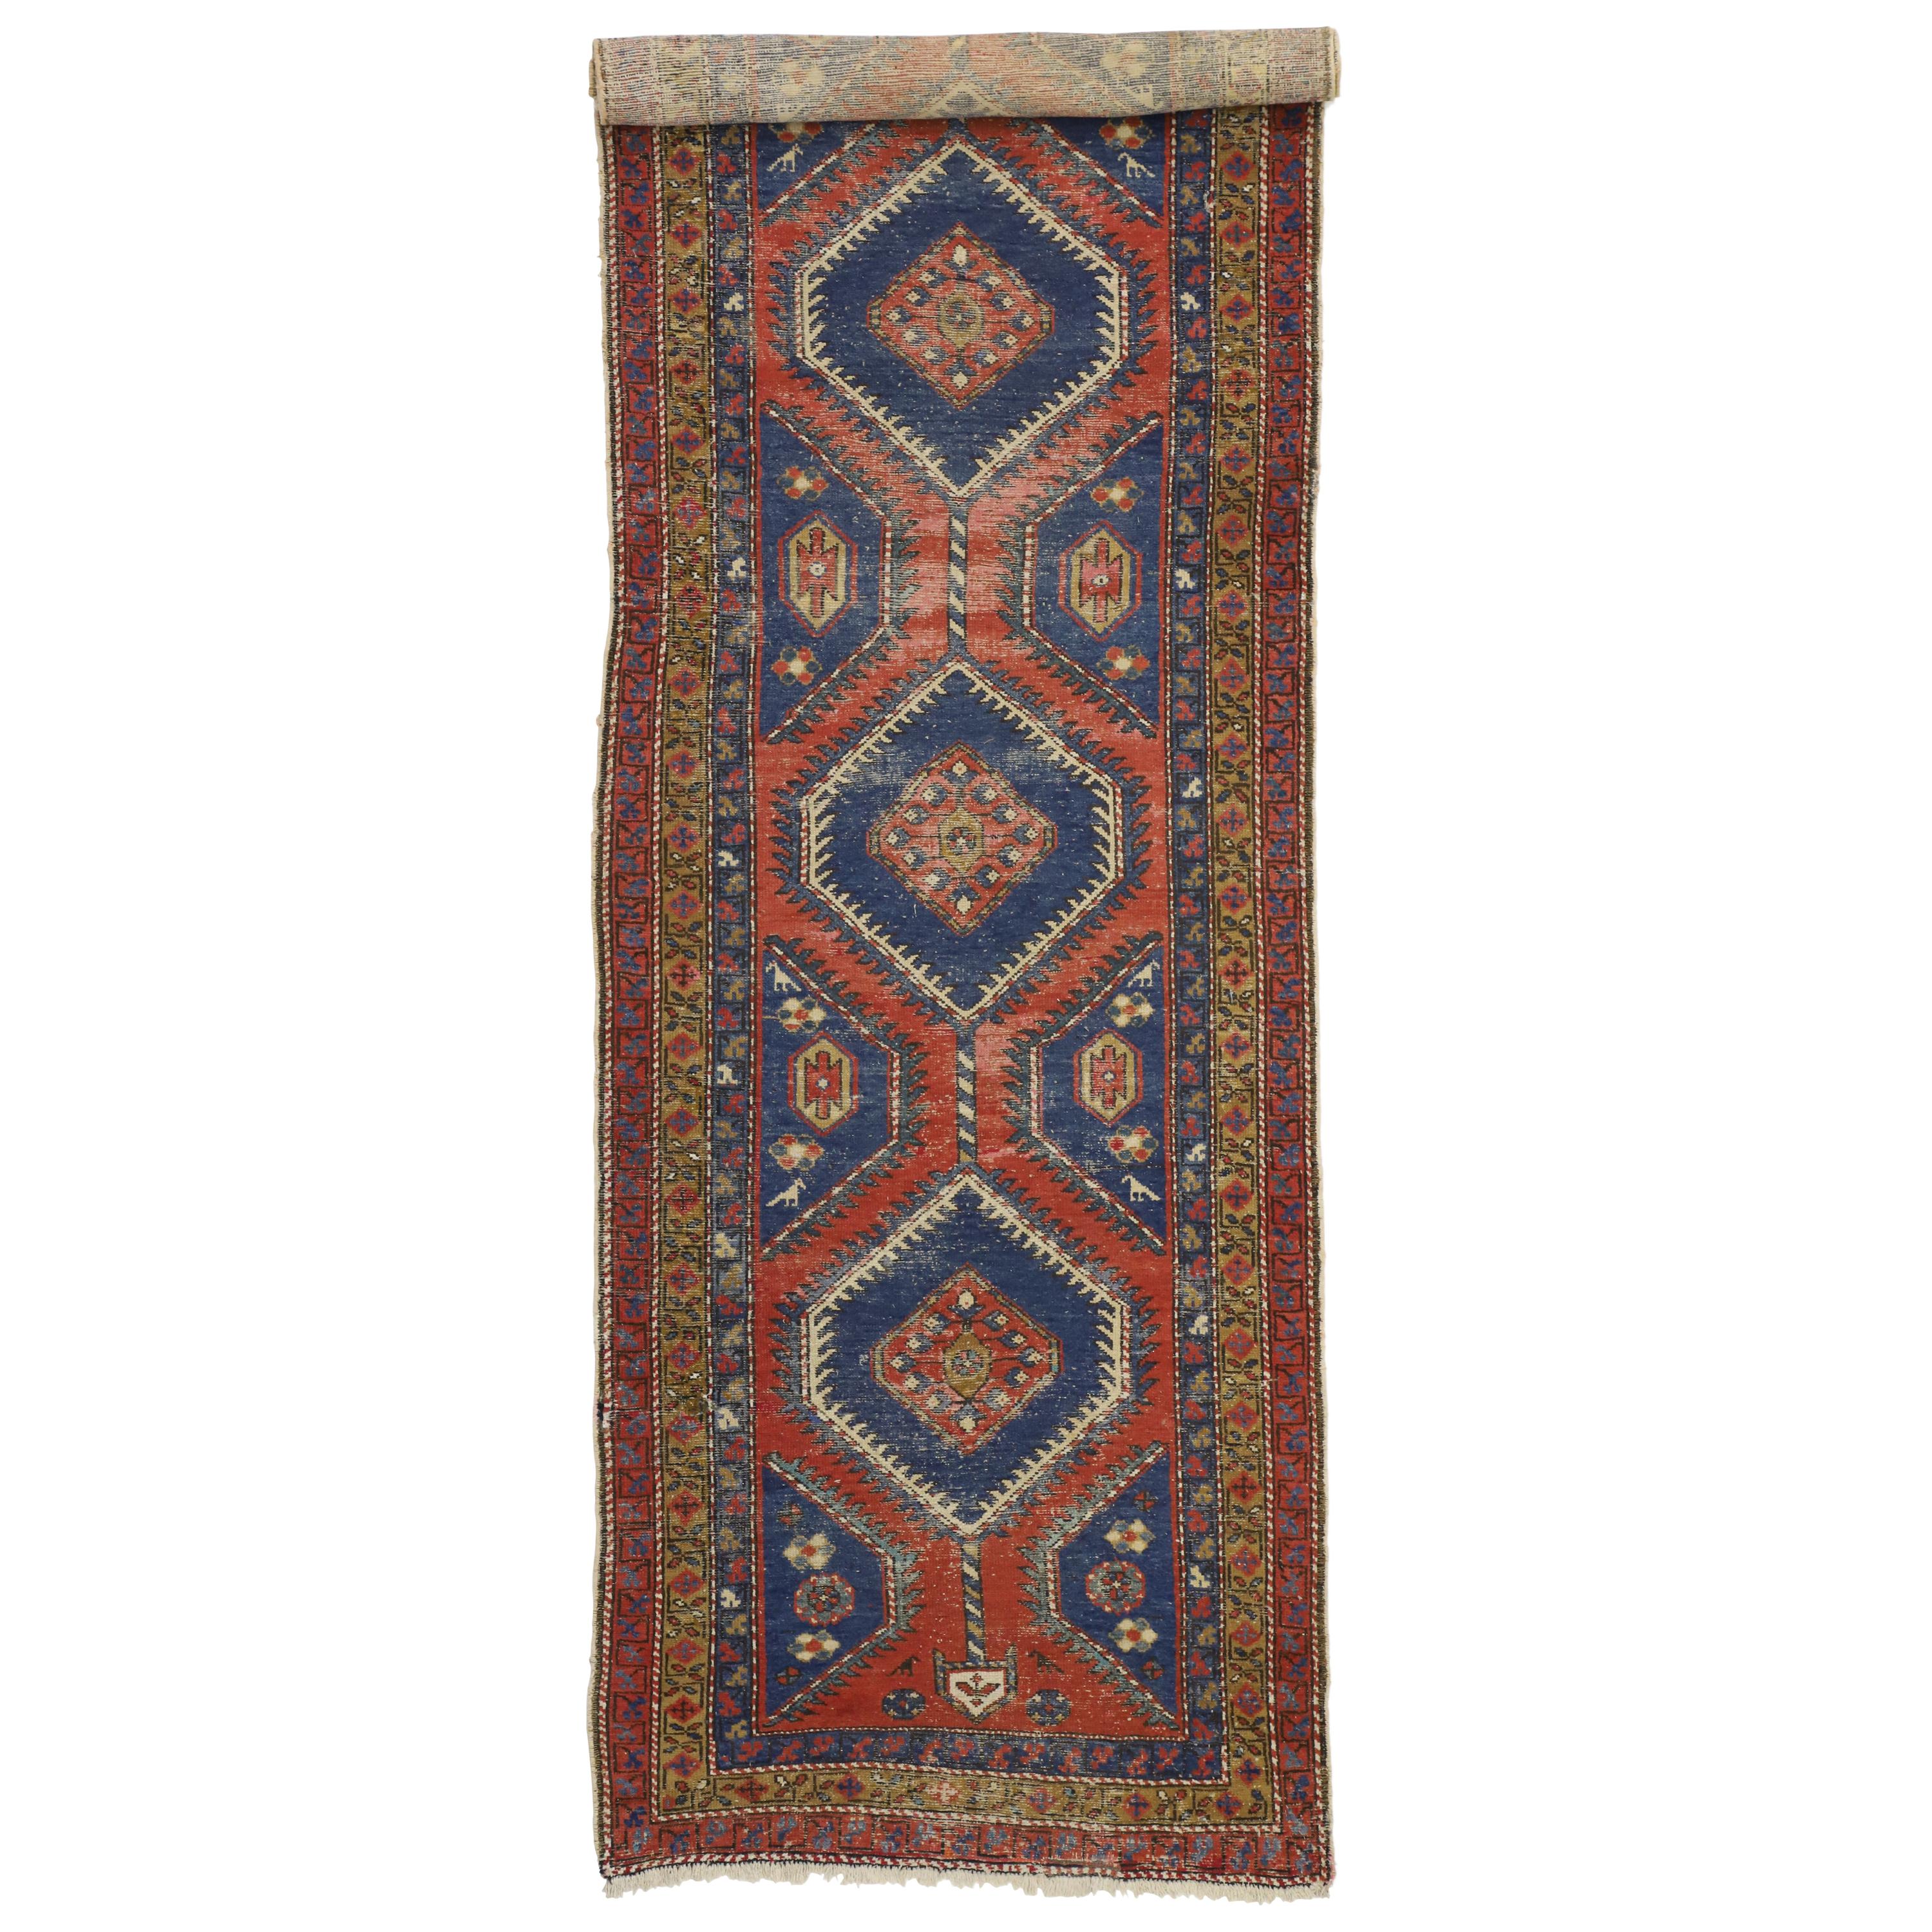 Distressed Antique Persian Azerbaijan Runner with Industrial Tribal Style